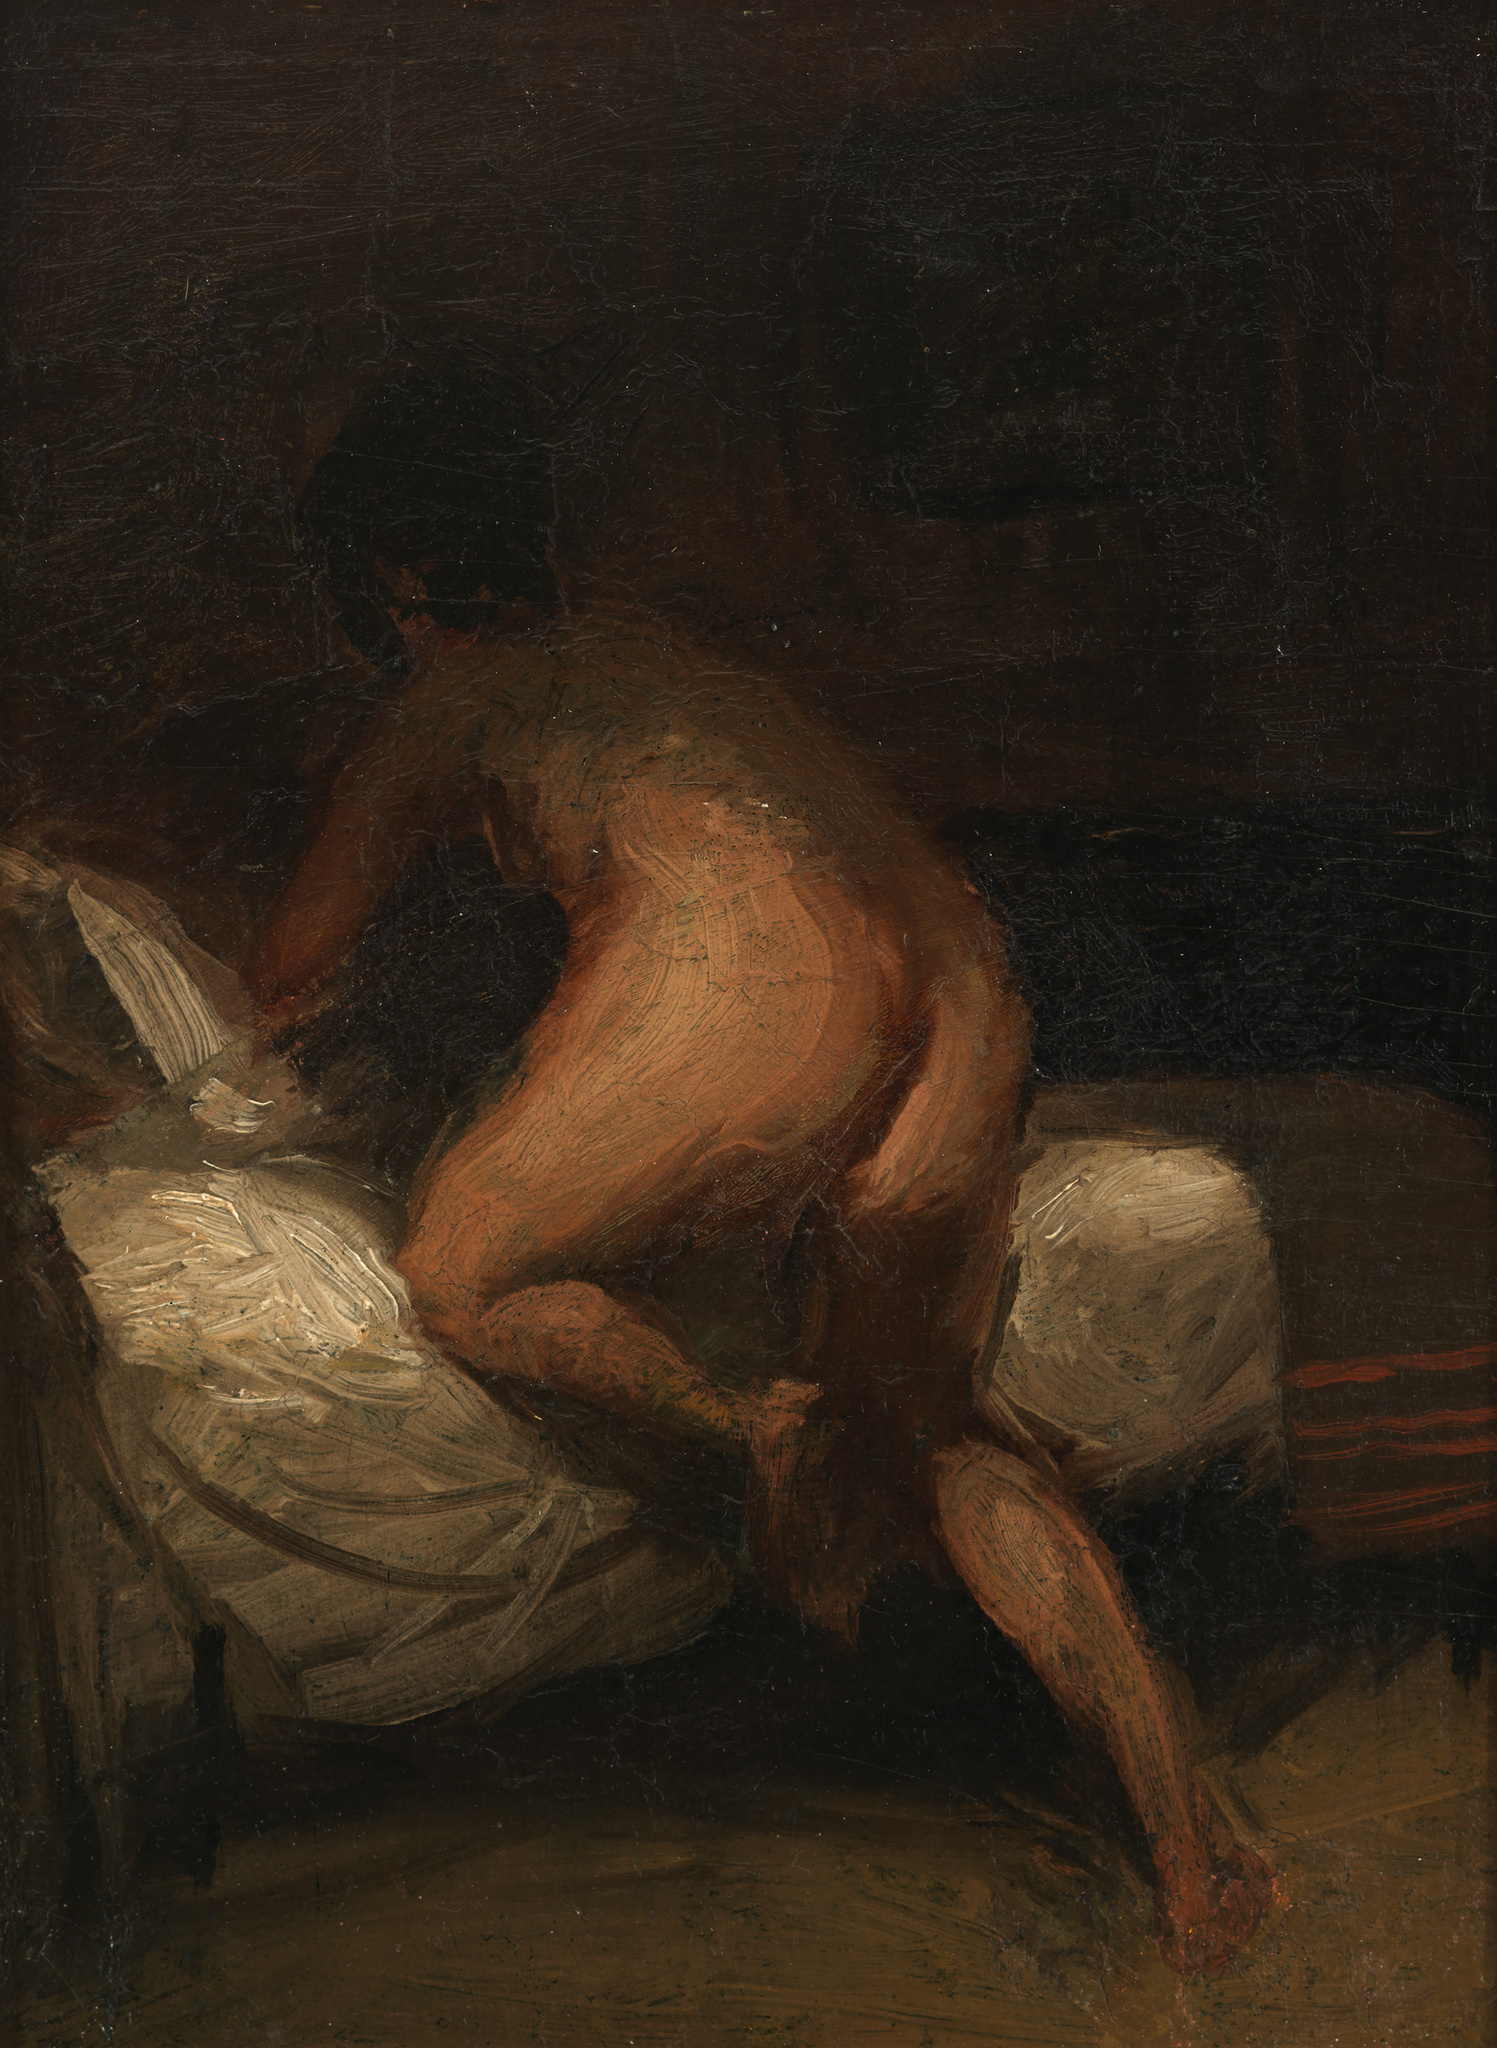 A explicit image of a white woman's crawing into her undone bed